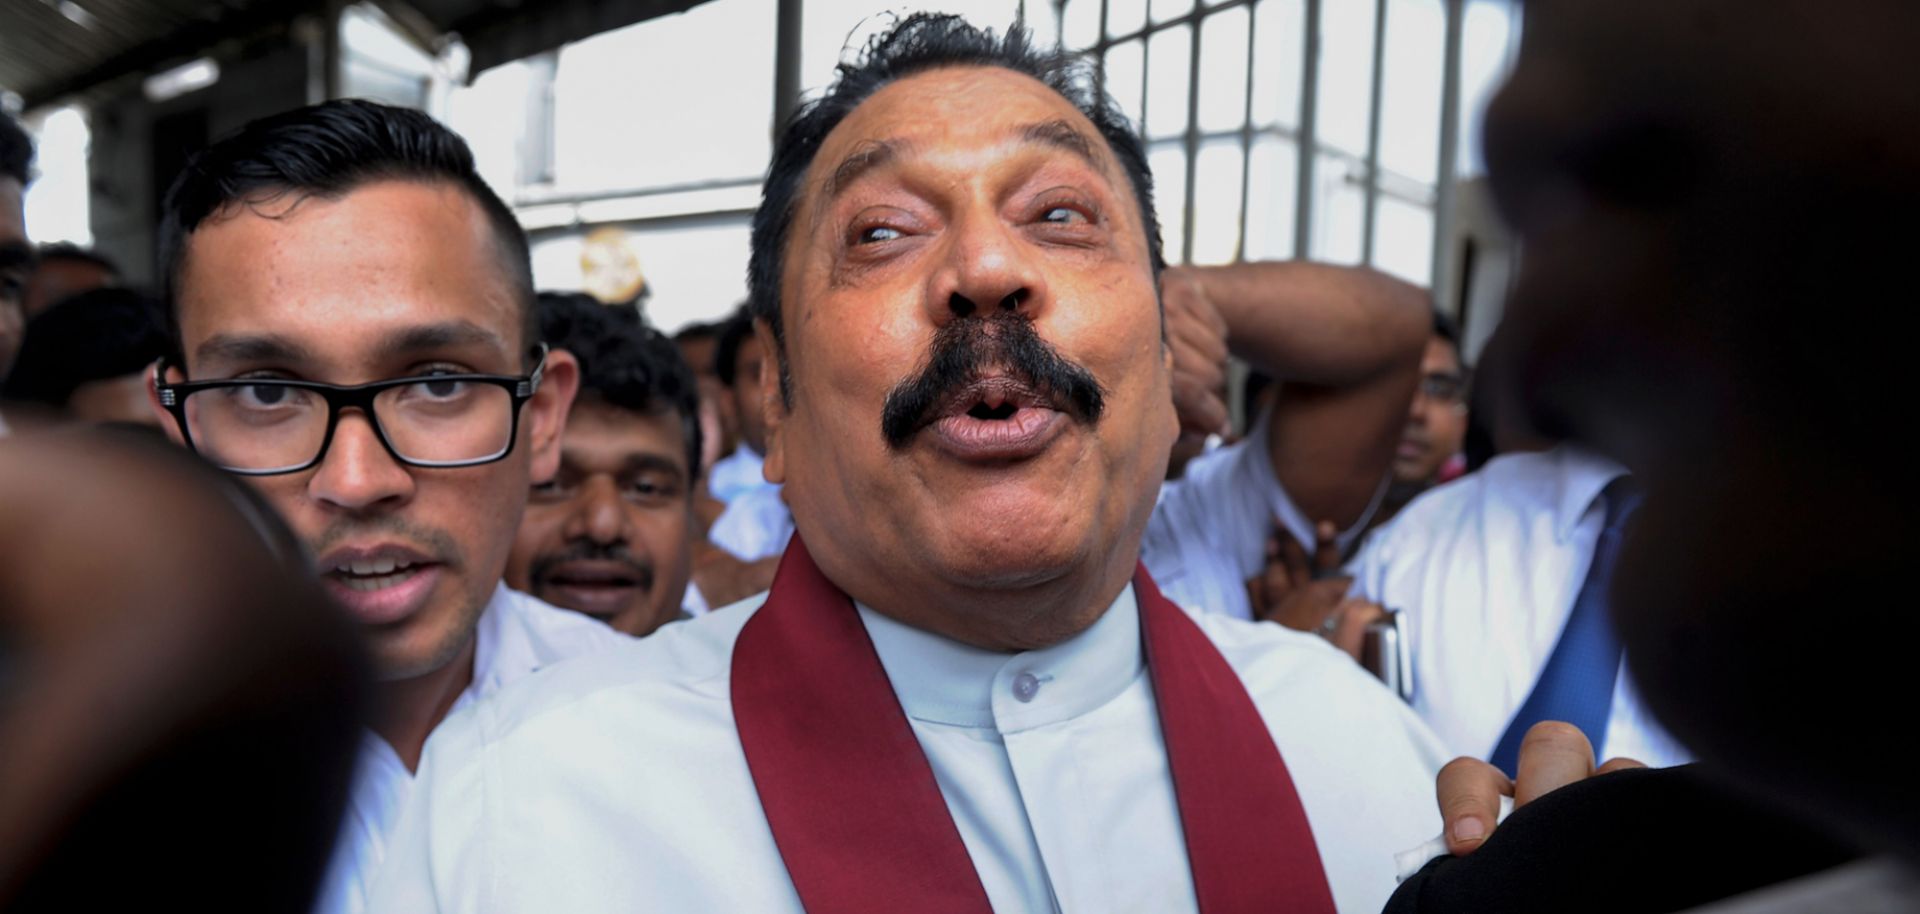 Though the central government and parliament still have a few years before the next general elections, the upheaval in Sri Lankan politics -- and a round of local elections later this year -- will test the sustainability of  Sirisena's administration.